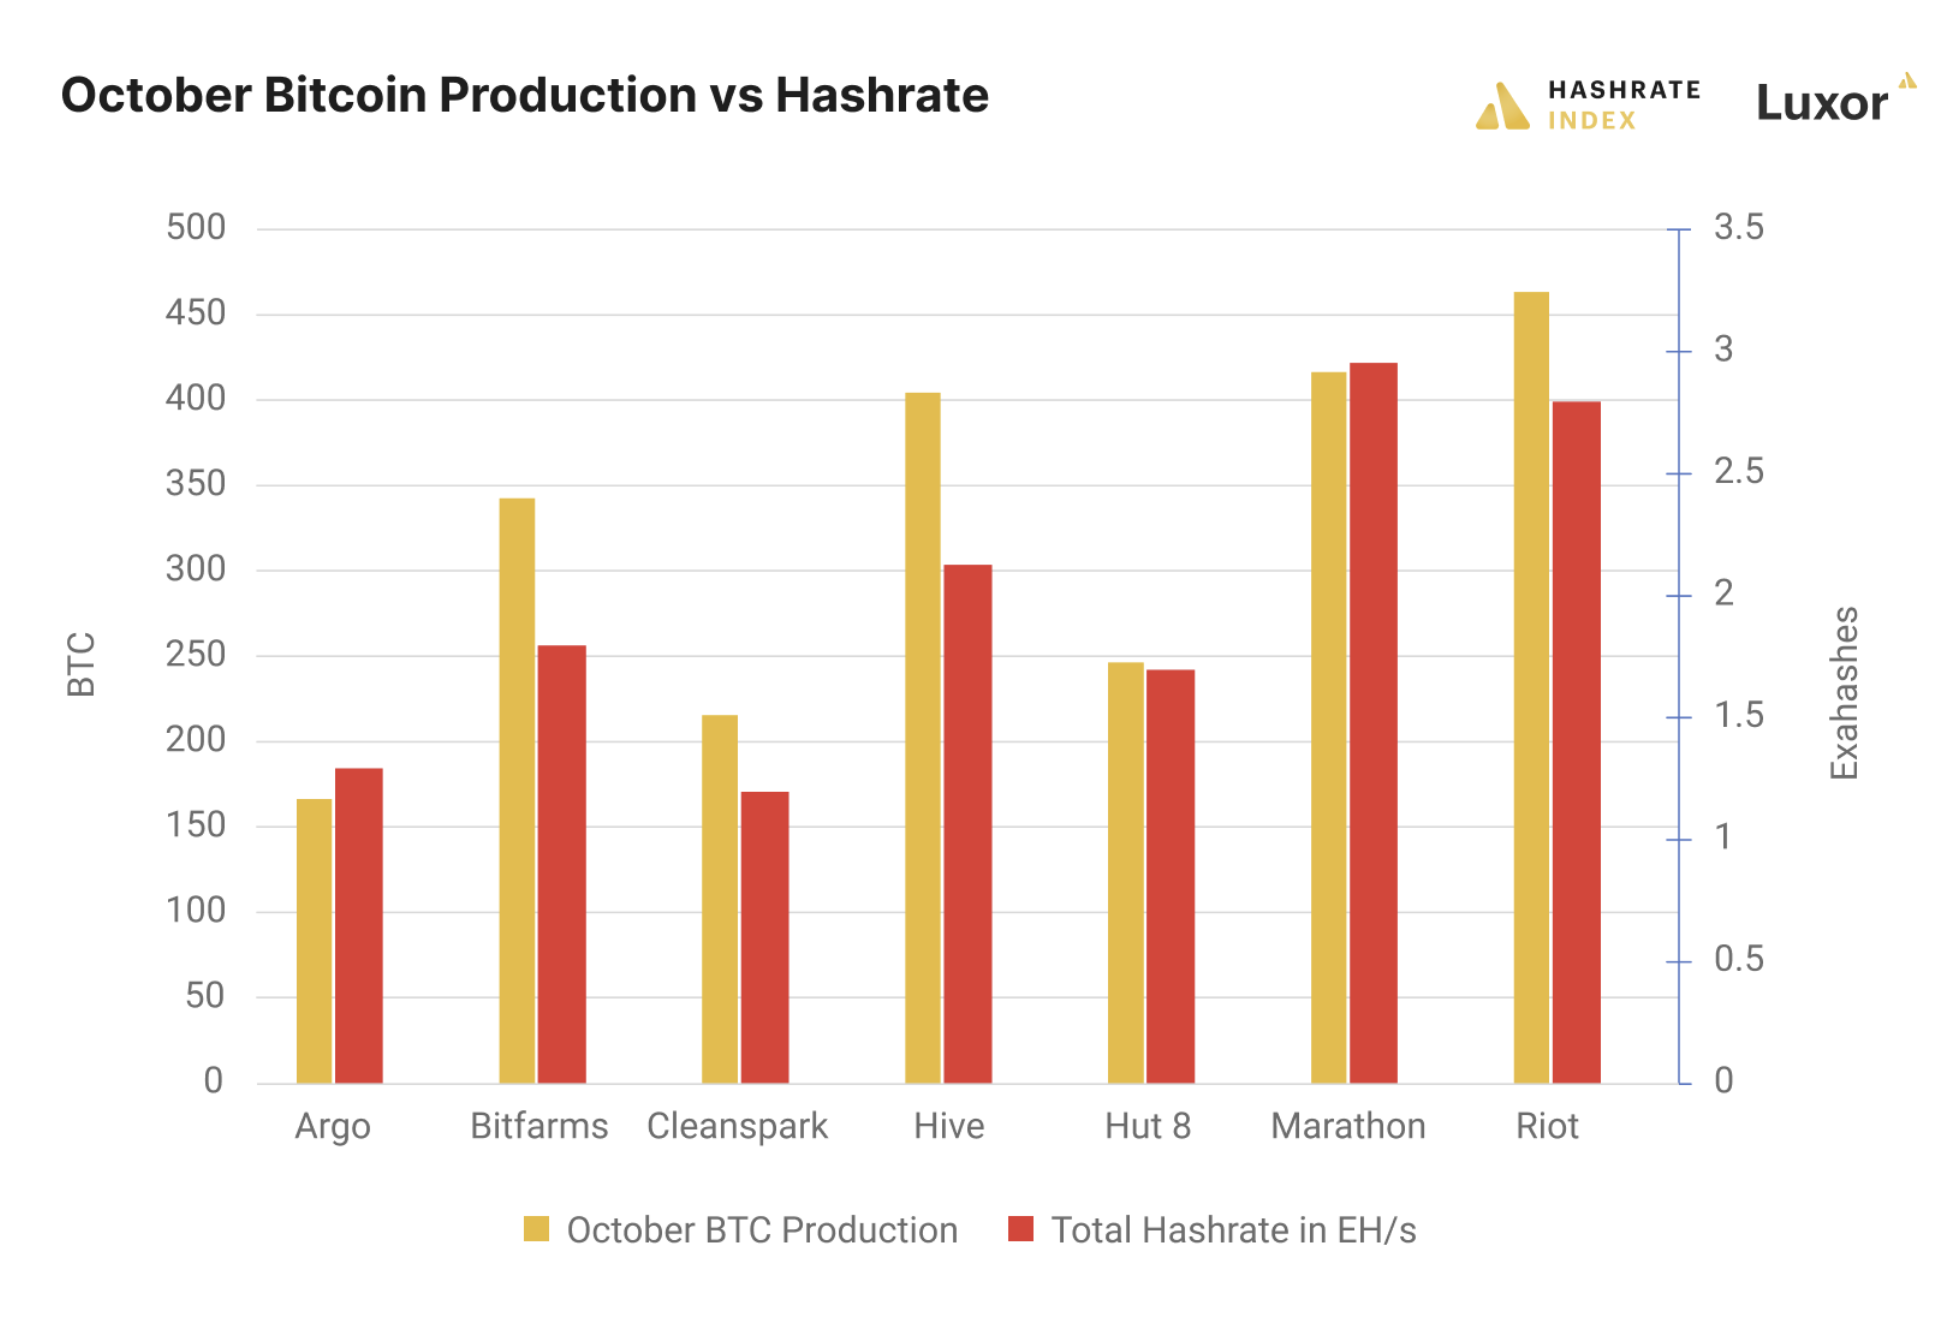 Bitcoin mining production vs. latest reported hashrate by public miners. Source: company press releases, public filings